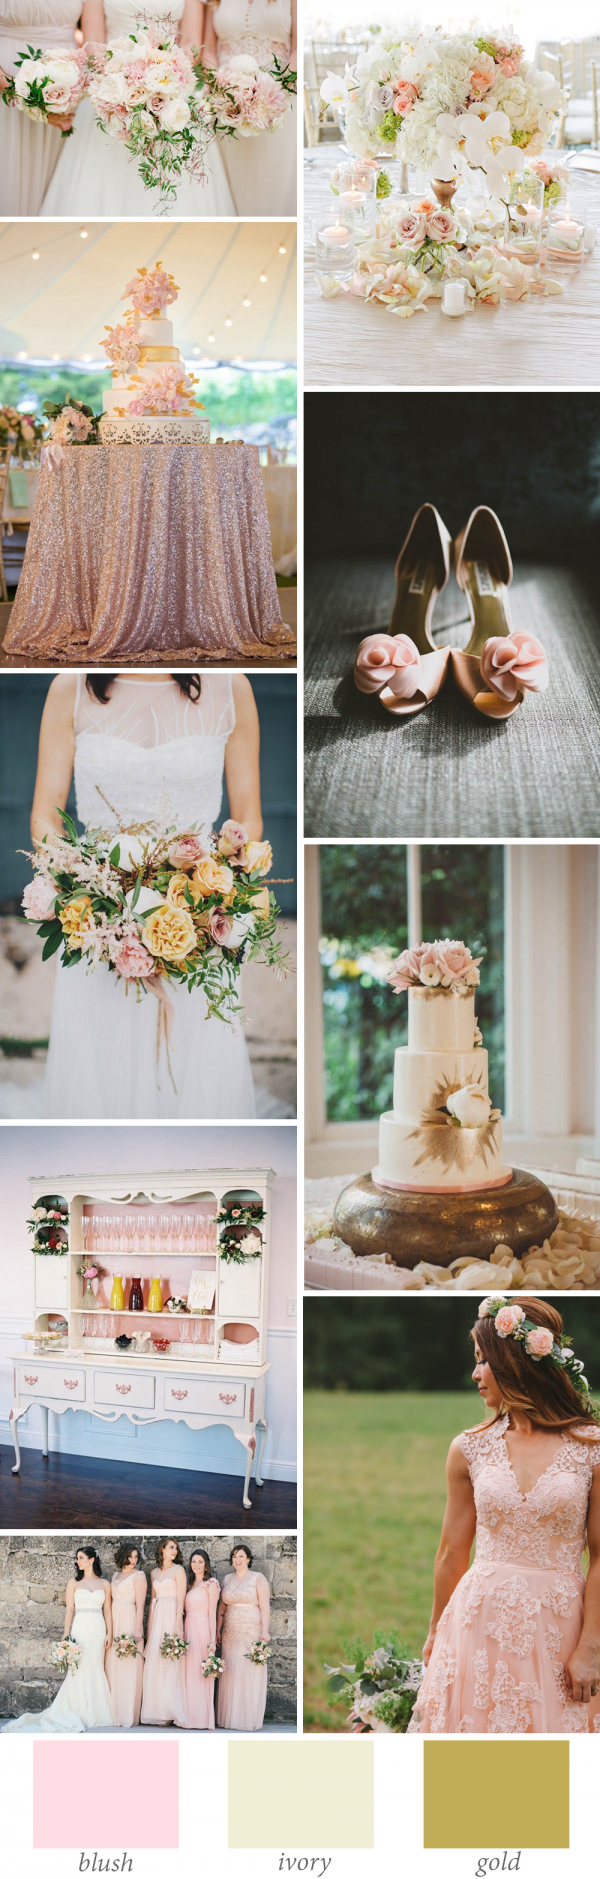 blush ivory and gold wedding color palette